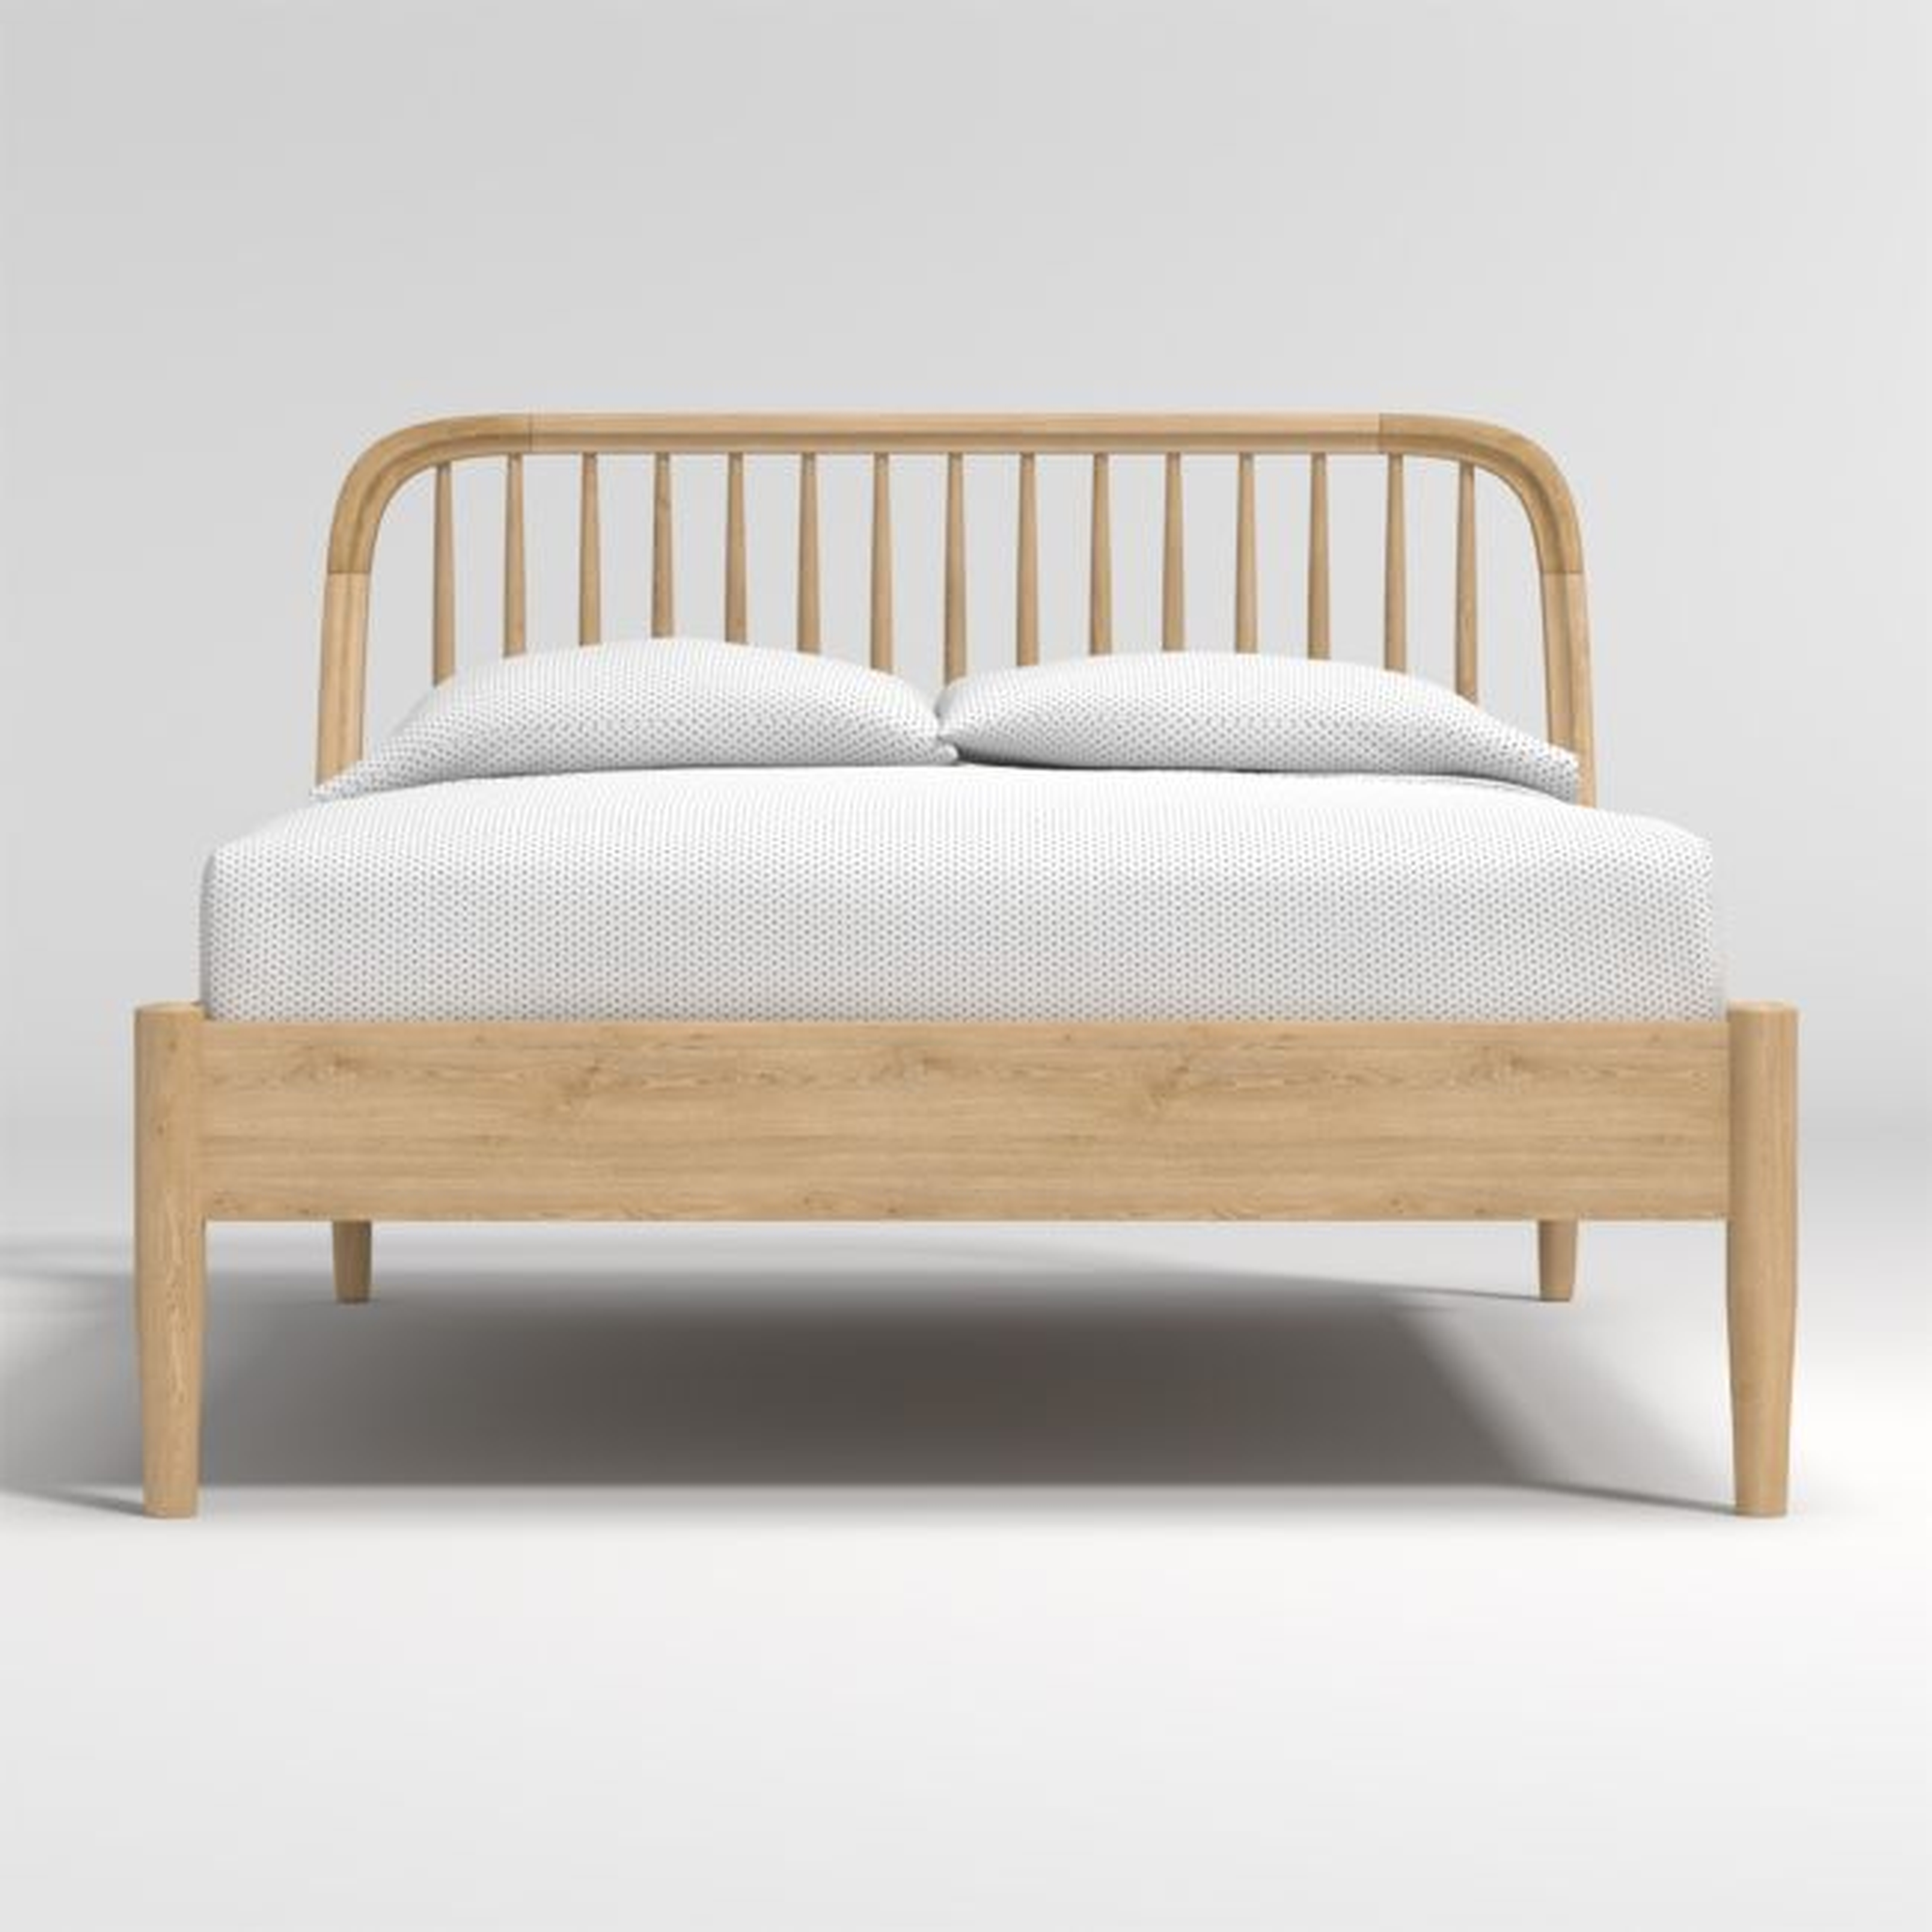 Bodie Spindle Natural Oak Wood Kids Full Bed - Crate and Barrel